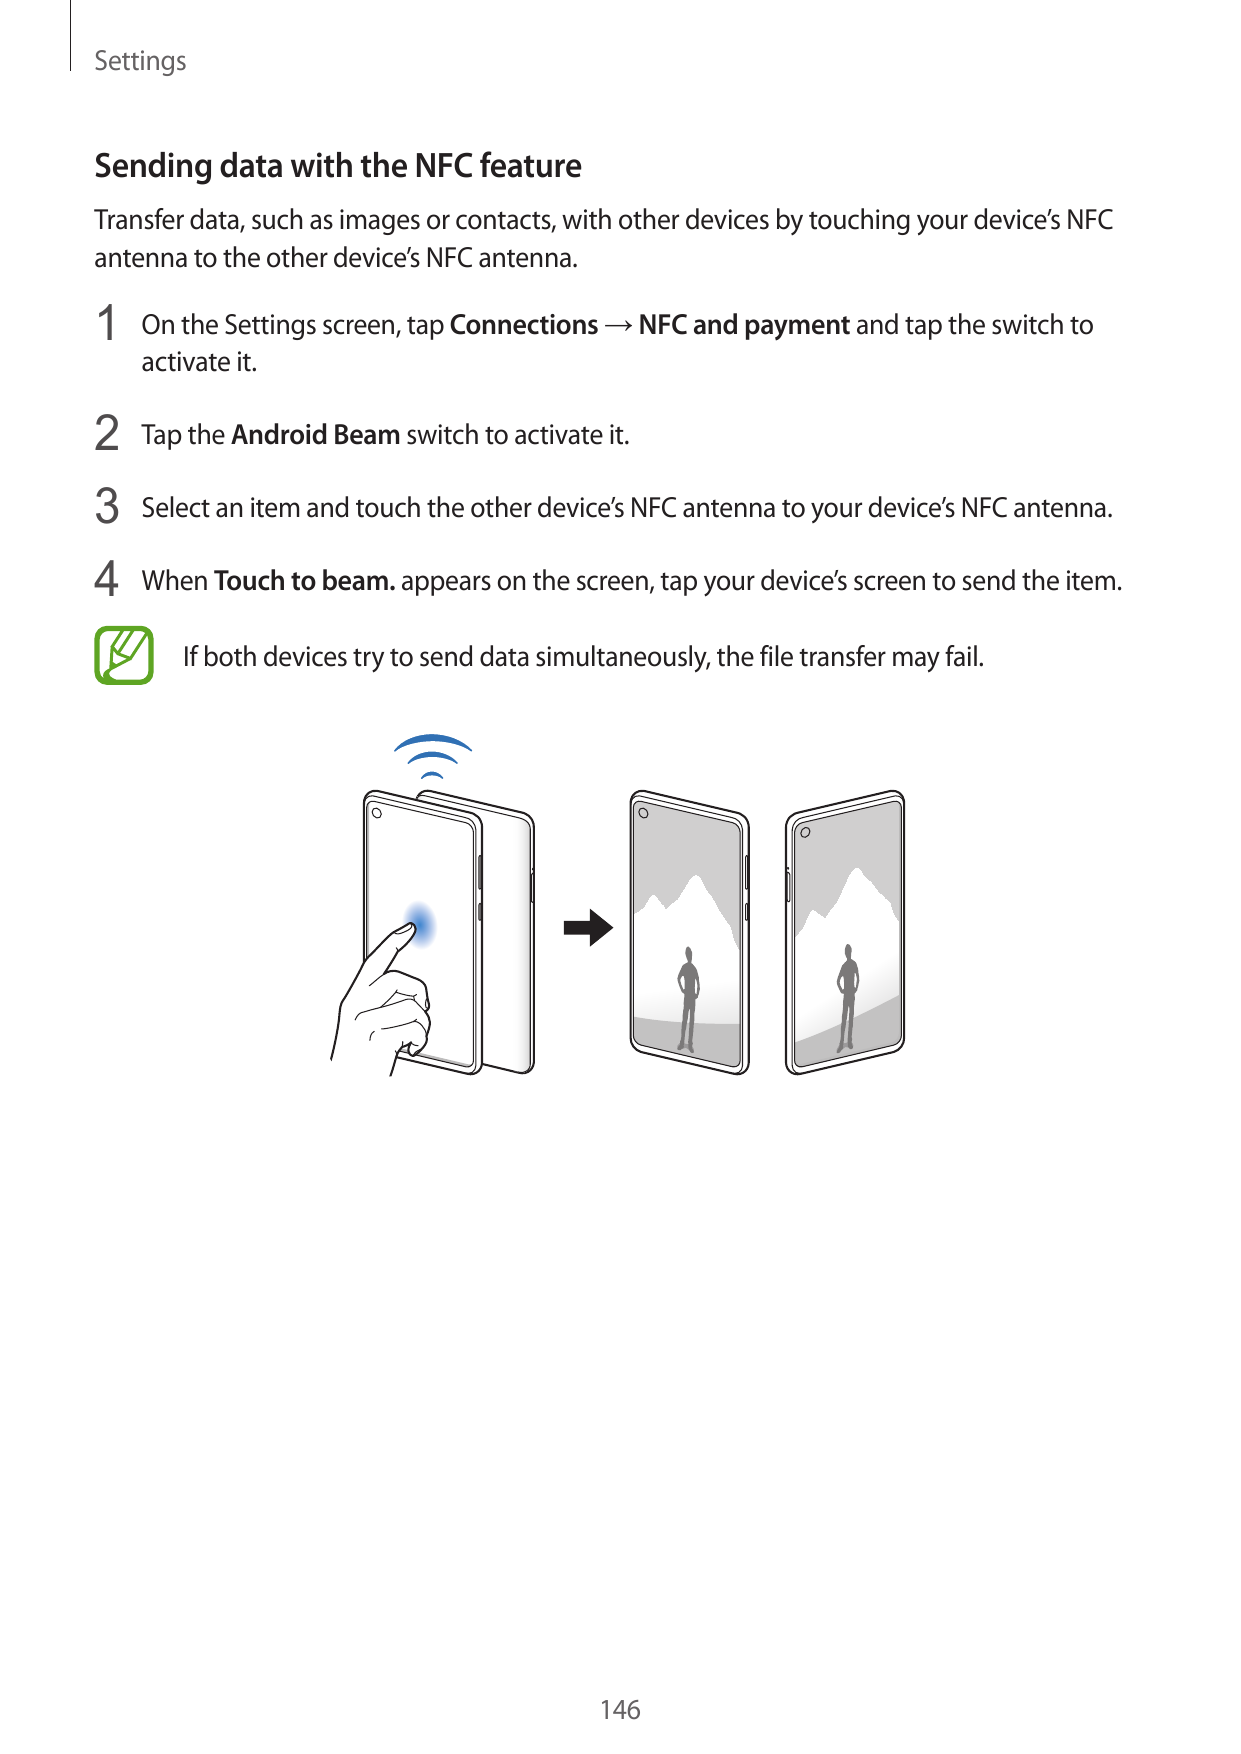 SettingsSending data with the NFC featureTransfer data, such as images or contacts, with other devices by touching your device’s